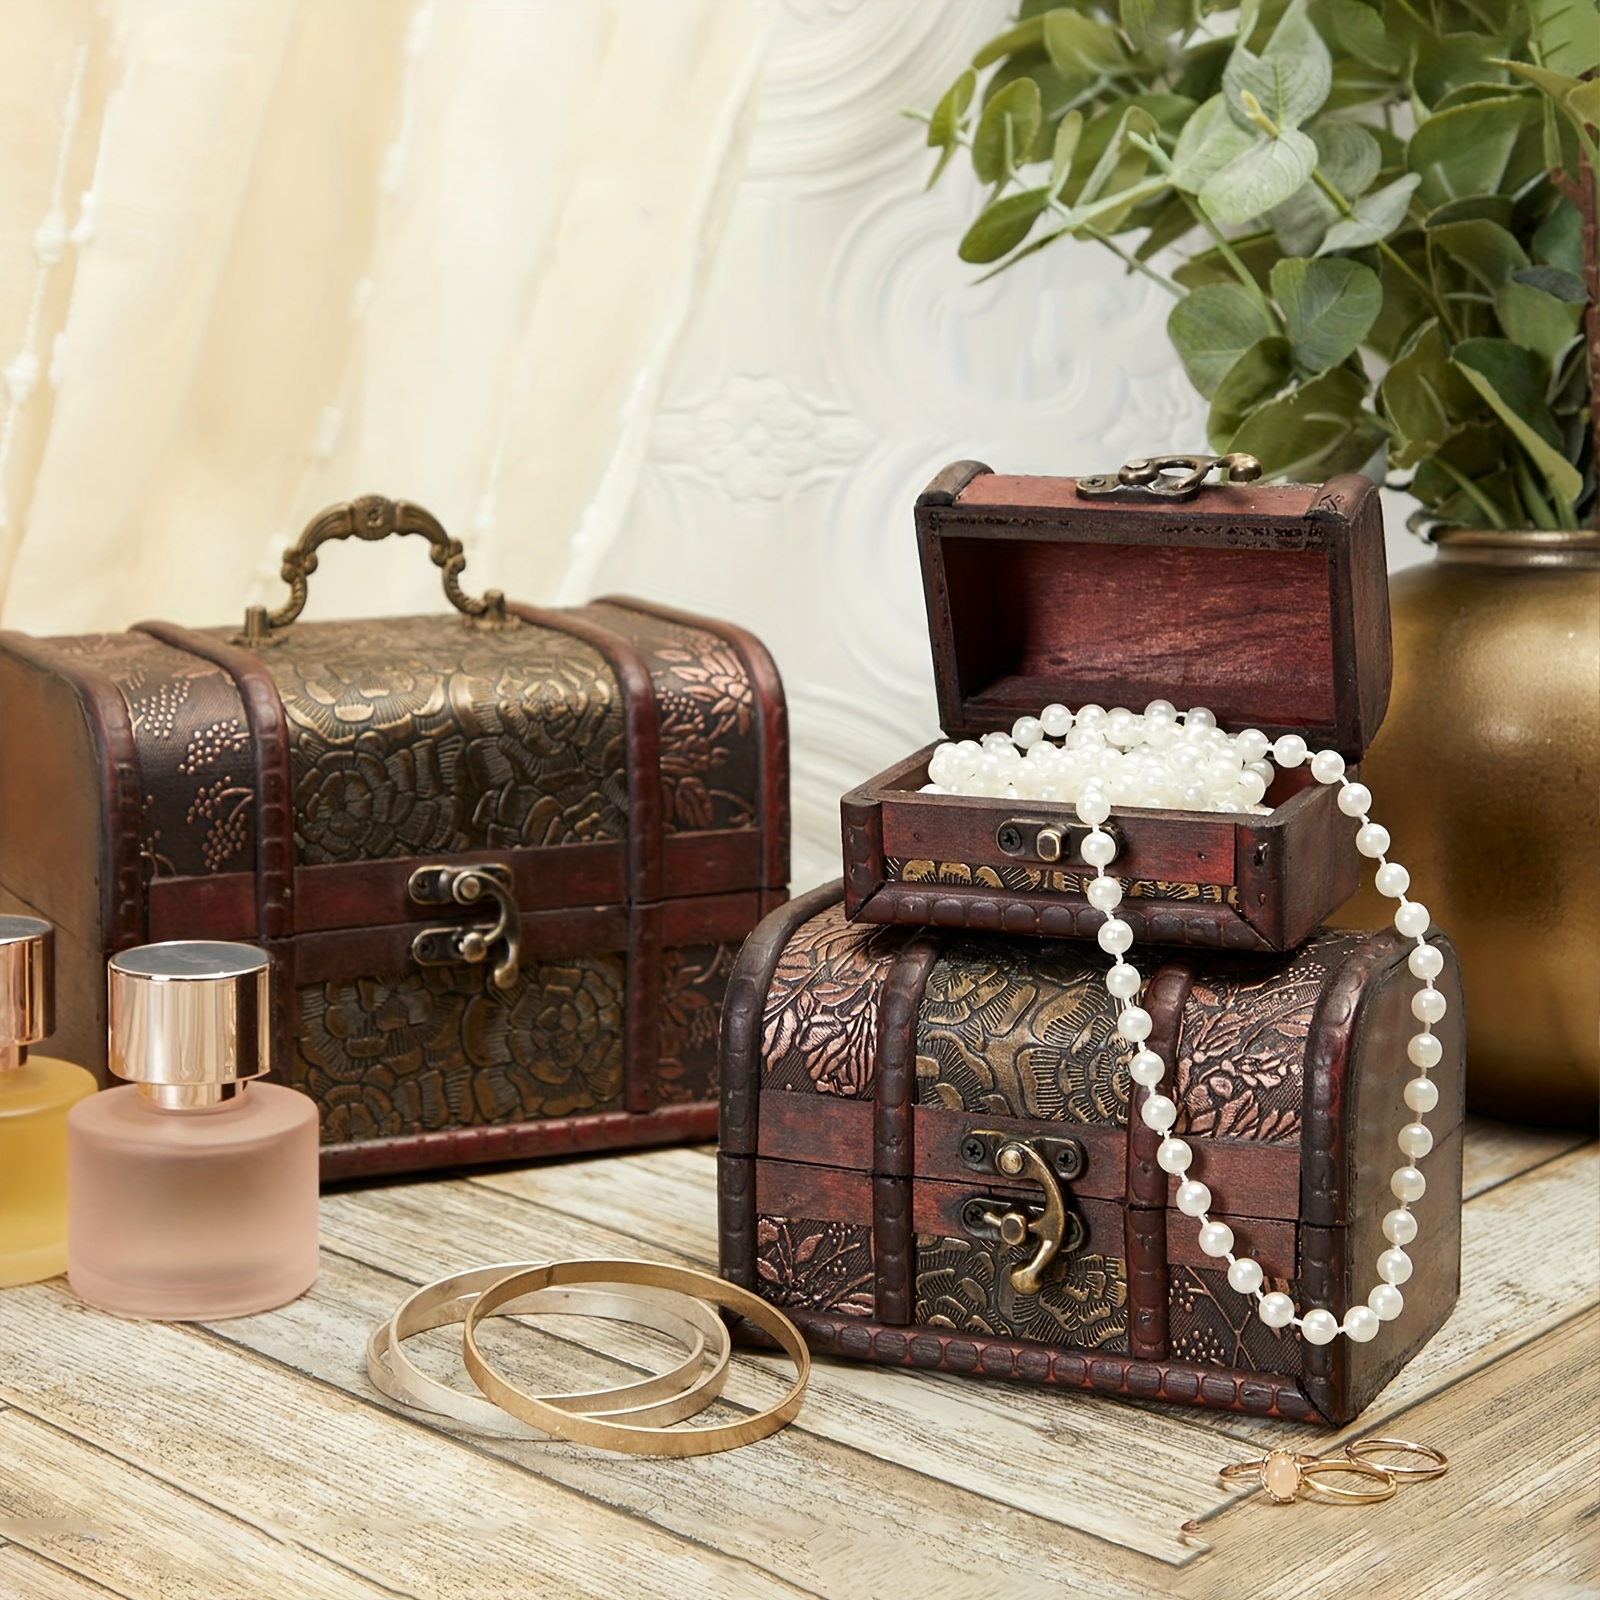 

3pcs/set Vintage Wooden Treasure Chest, Storage Boxes, Decorative Vintage Style Trunks For Jewelry Keepsakes, Home Decor, Christmas Gift, New Year Gift, Gift For Man, Gift For Woman